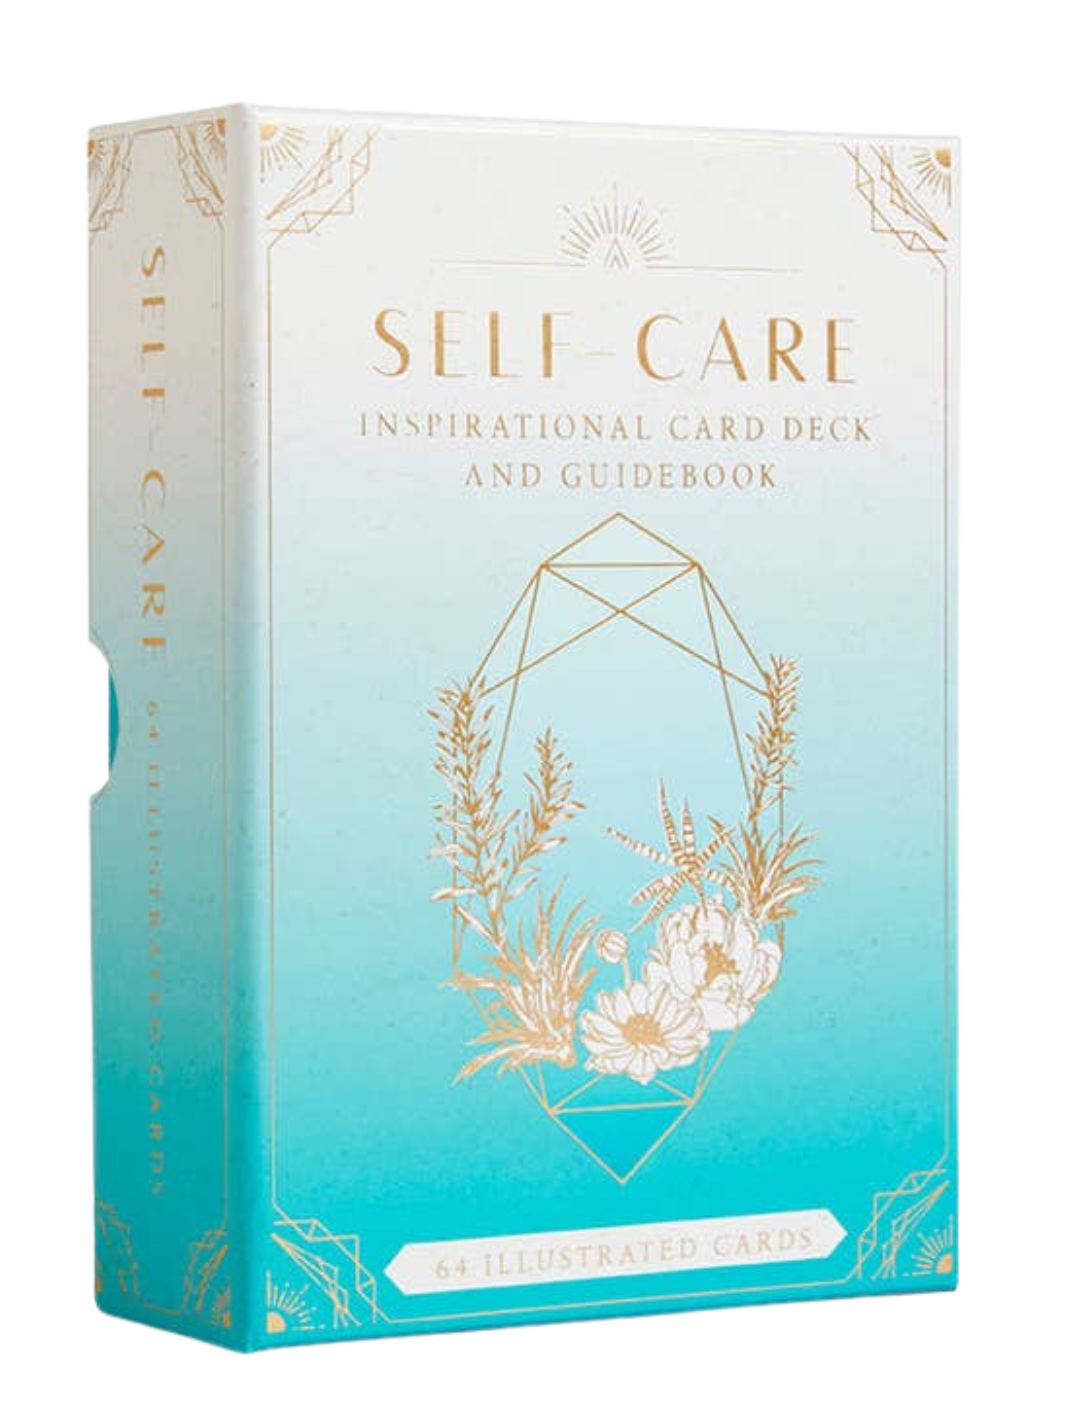 Self-Care Inspirational Card Deck and Guidebook